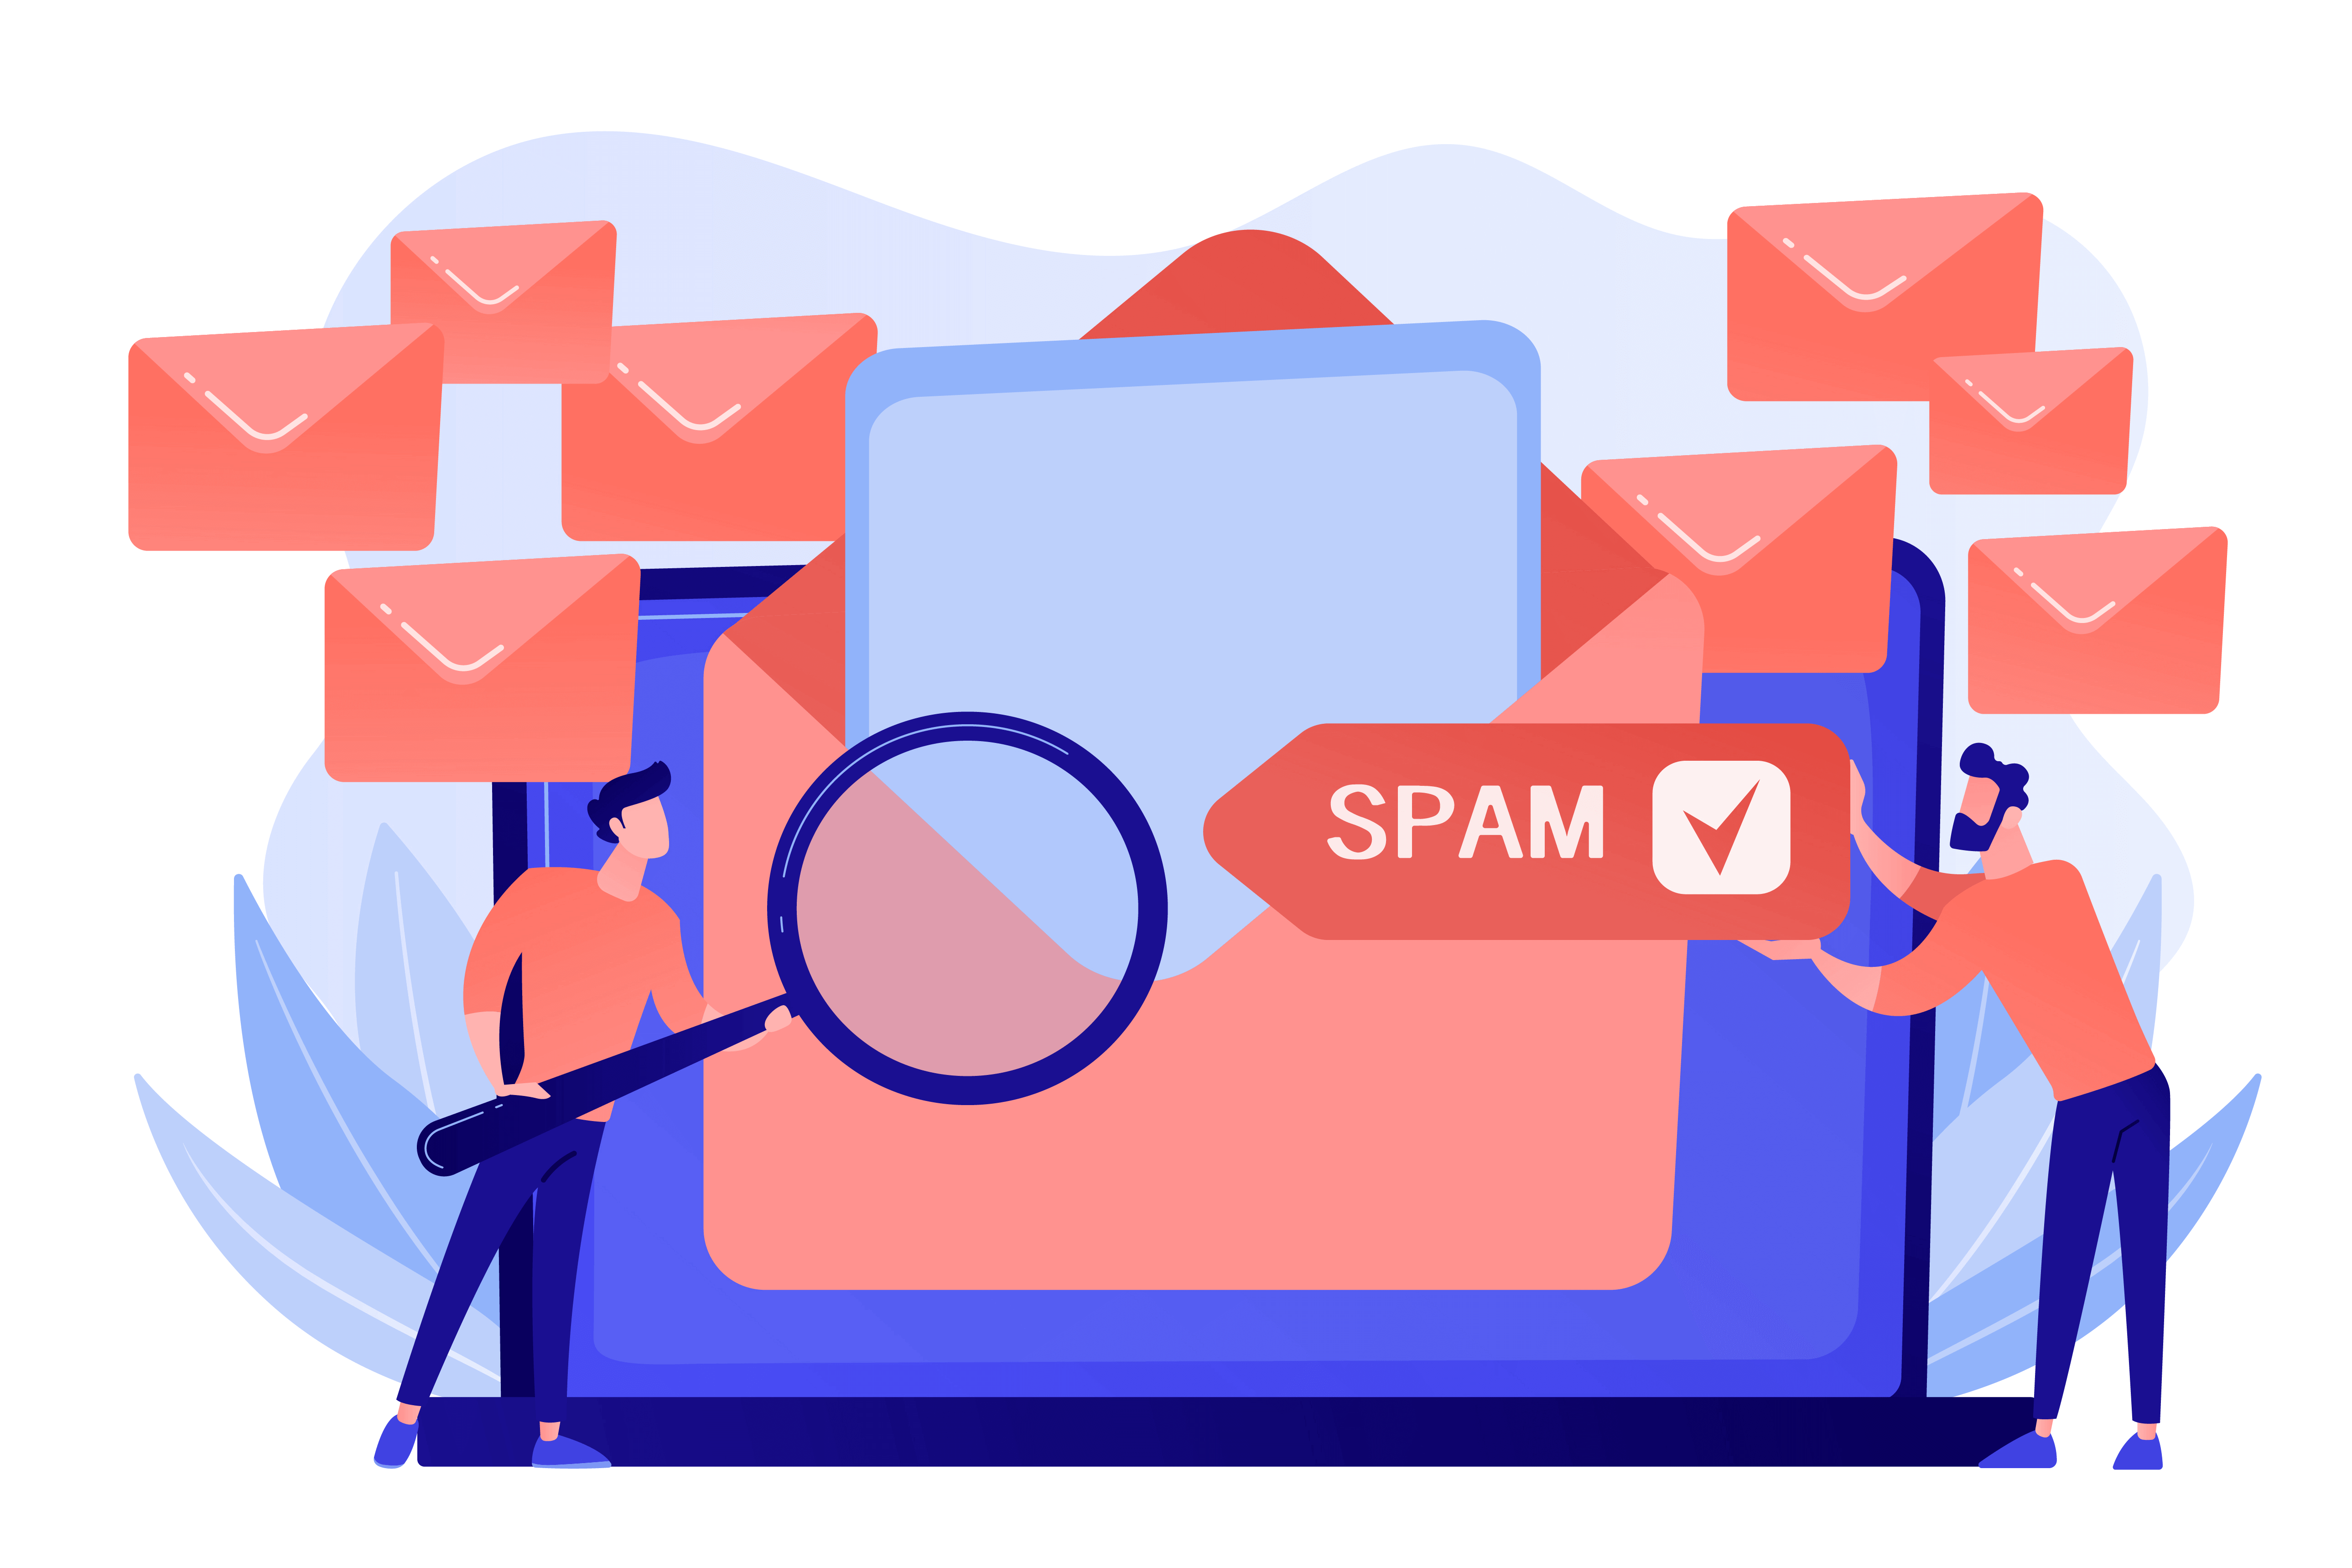 How can I make sure my emails don’t end up in the spam folder?